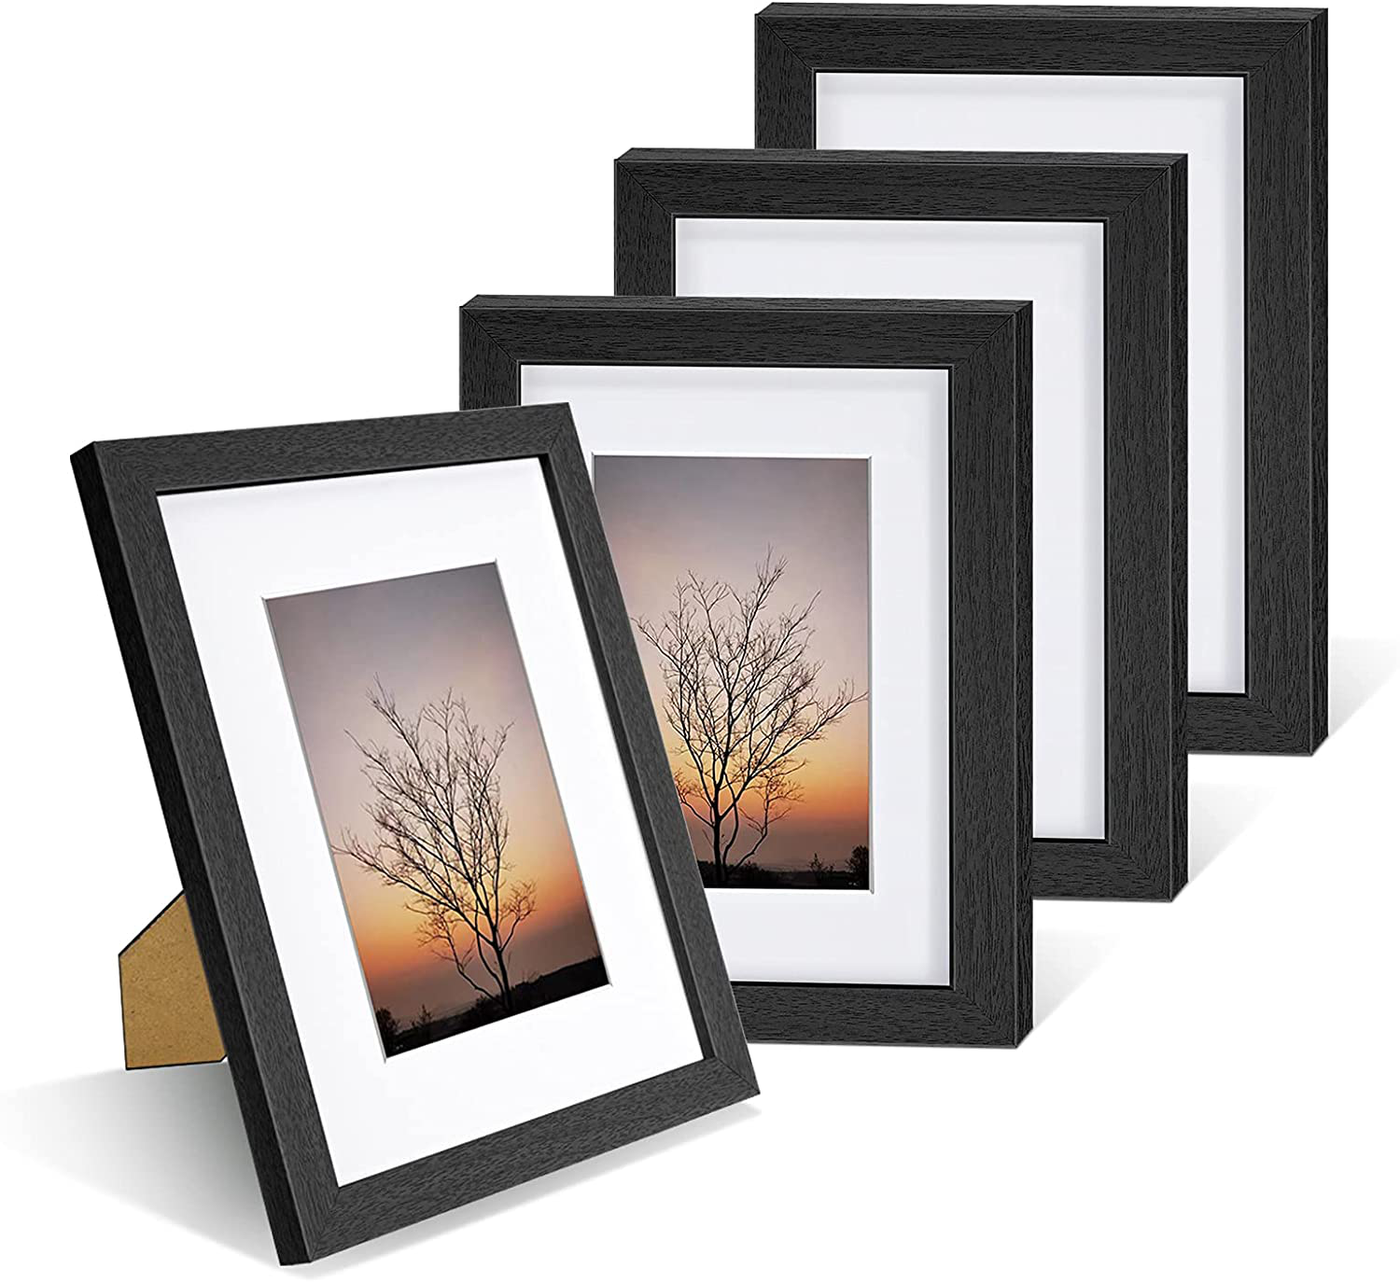 Nacial Picture Frames 5x7 inch Set of 4, Black Photo Frame with Wood Grain, Display 4x6 Photo with Mat, Display 5x7 photo without Mat , Picture Frames Collage for Wall or Tabletop